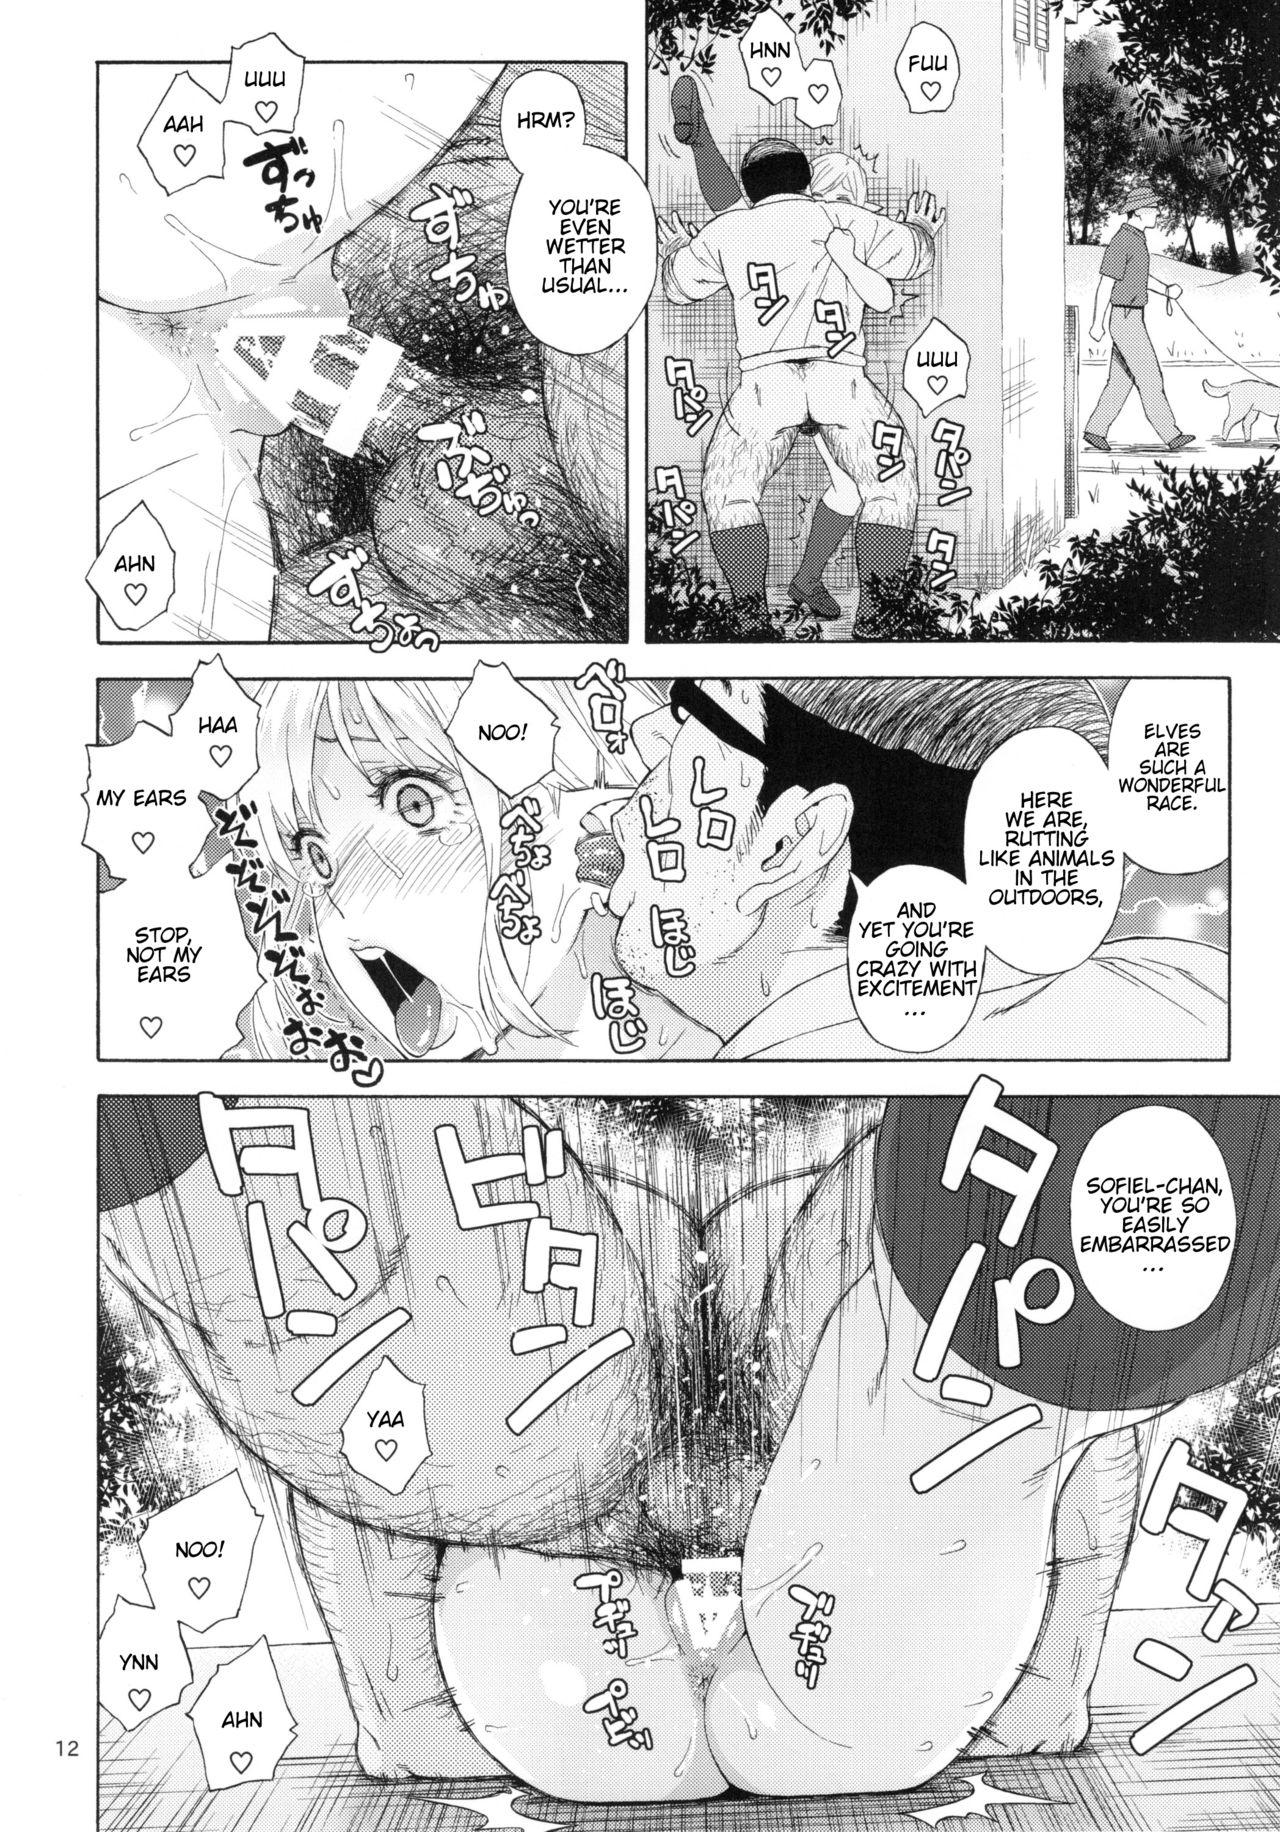 Submissive (C92) [666PROTECT (Jingrock)] Tenkousei JK Elf 3 -Houkago Yagai Jugyou- | High School Elven Transfer Student -After School Outdoor Lessons- [English] [Tremalkinger] Gayclips - Page 12